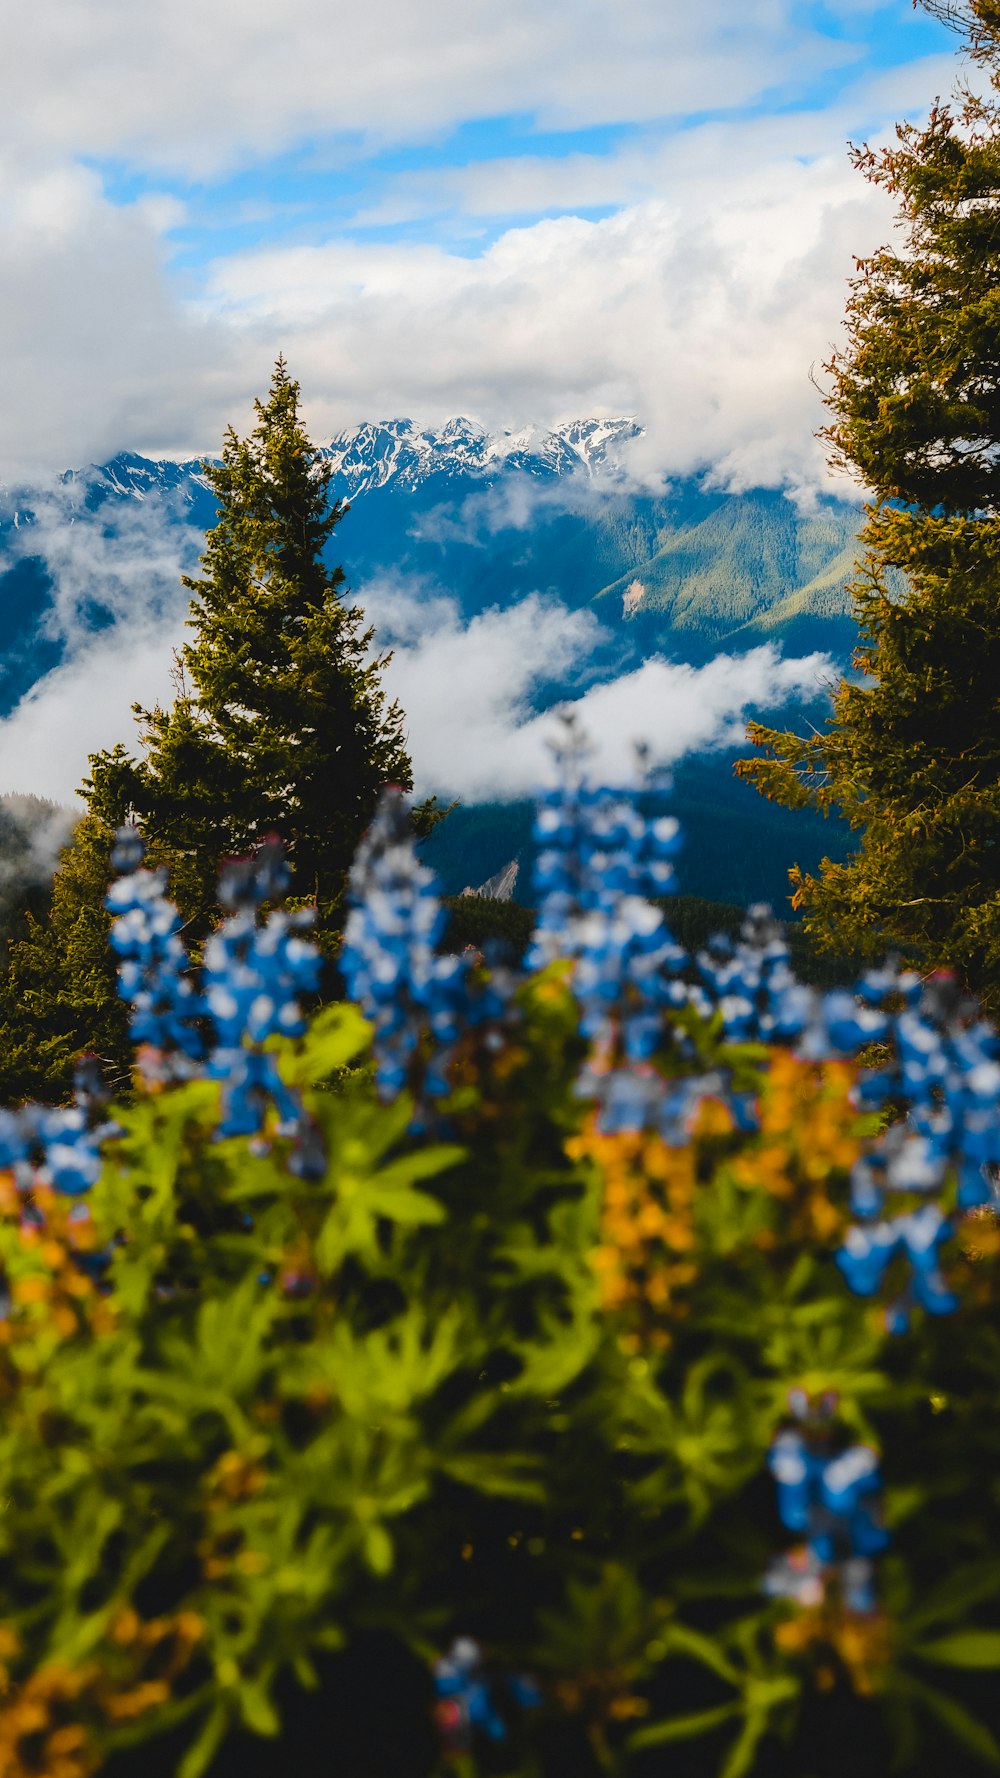 a view of a mountain range with blue flowers in the foreground